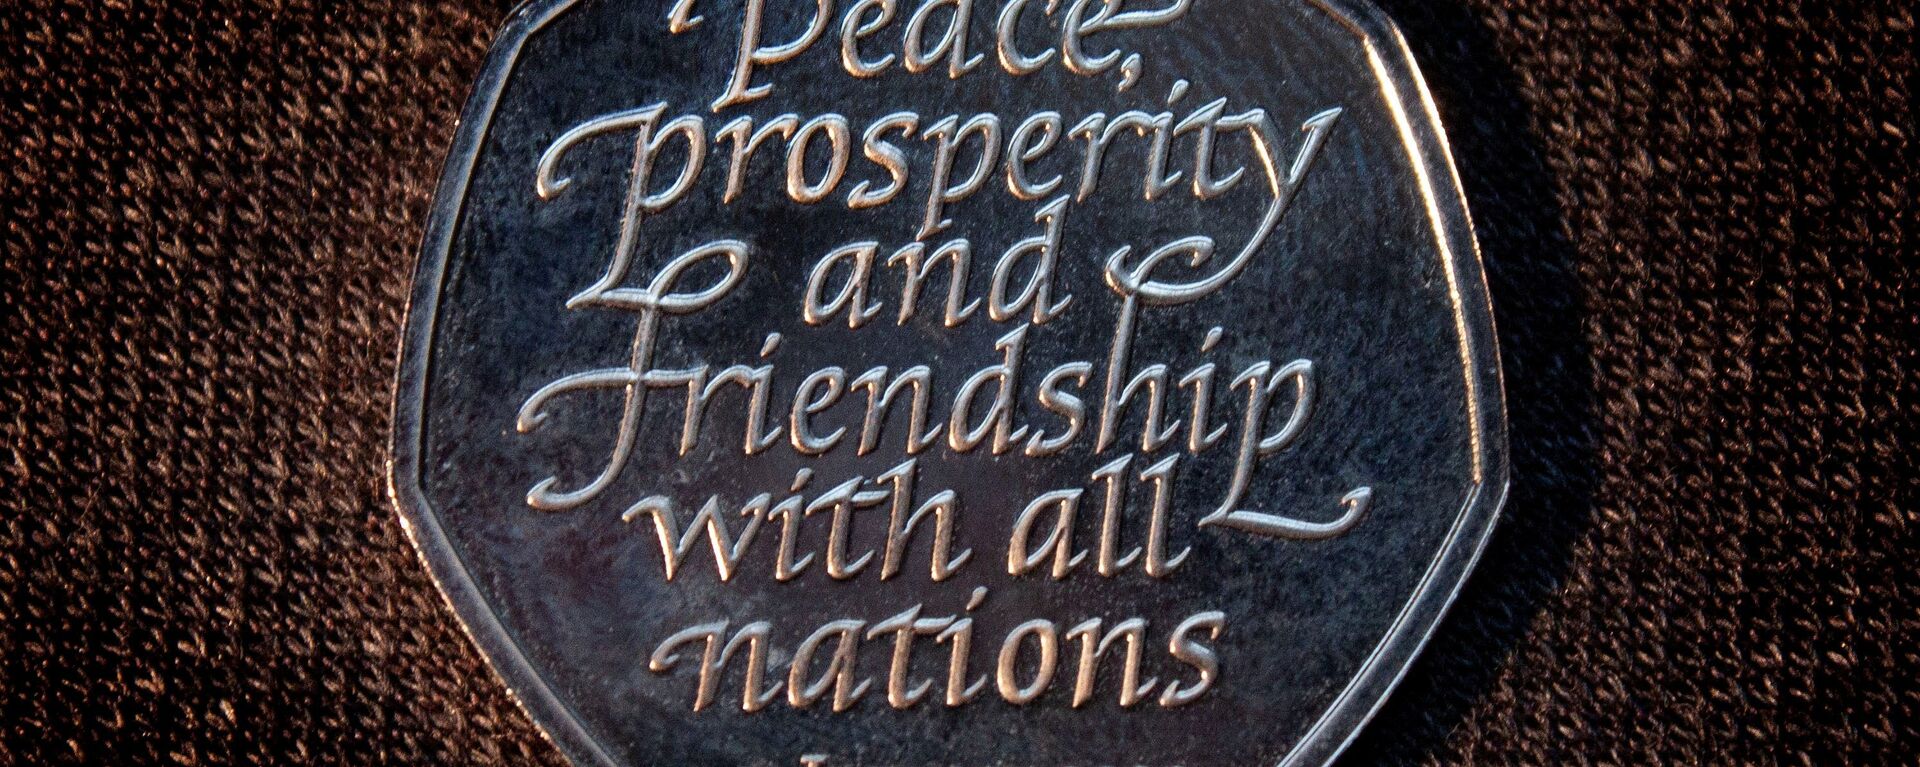 Brexit commemorative 50 pence coin that bears the words Peace, prosperity and friendship with all nations is pictured in an unknown location and uploaded to social media on January 26, 2020 - Sputnik International, 1920, 27.01.2020